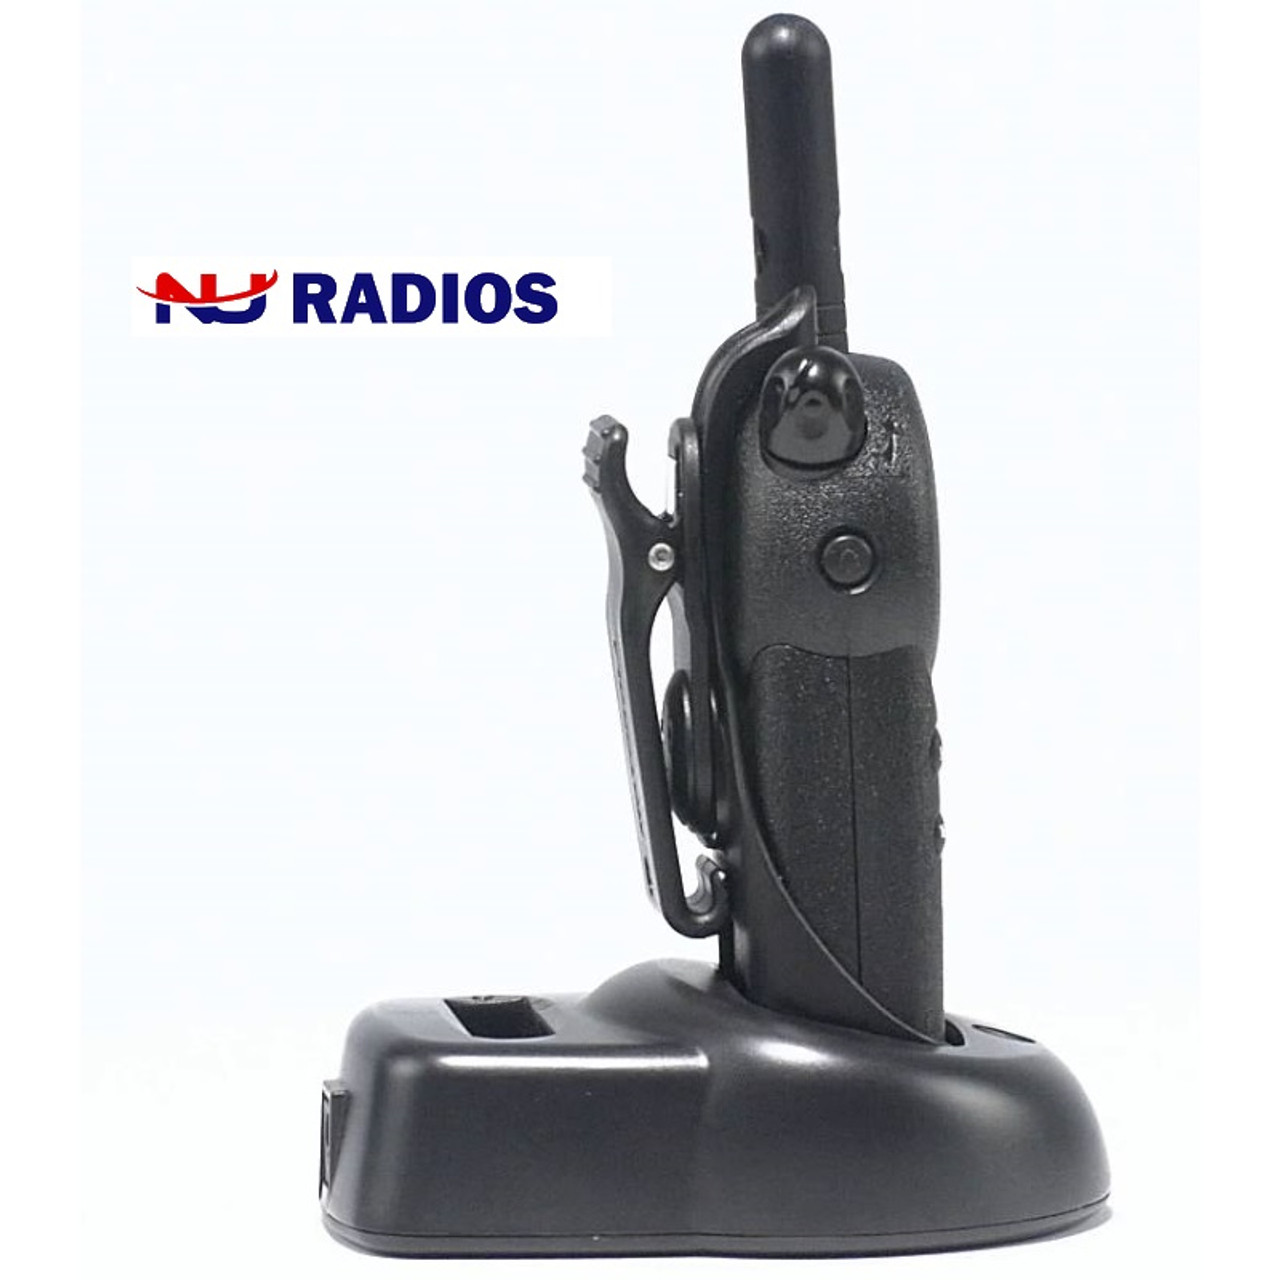 Motorola CLS1110 UHF Two Way Radio for business is a single